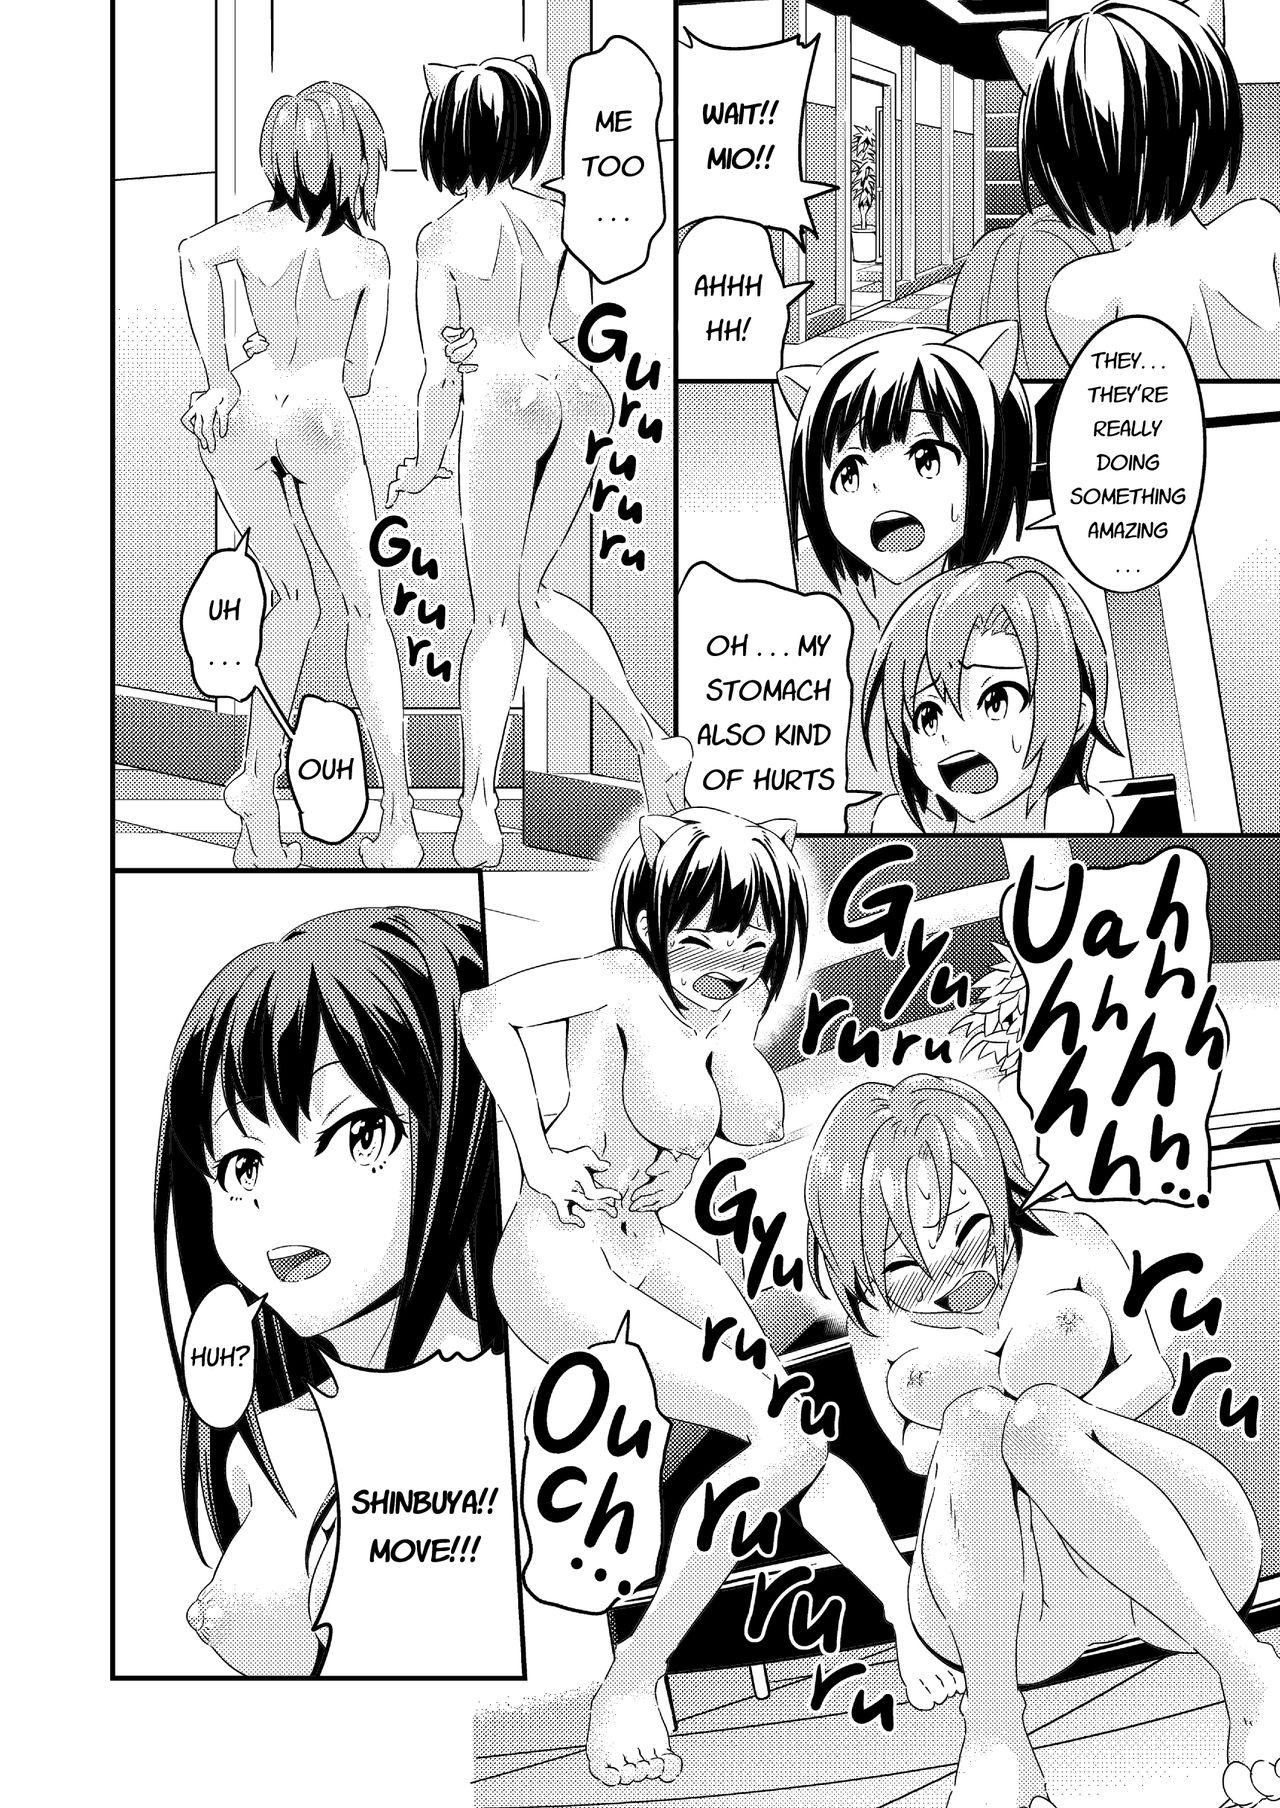 People Having Sex ICE WORK - The idolmaster Anal Play - Page 9